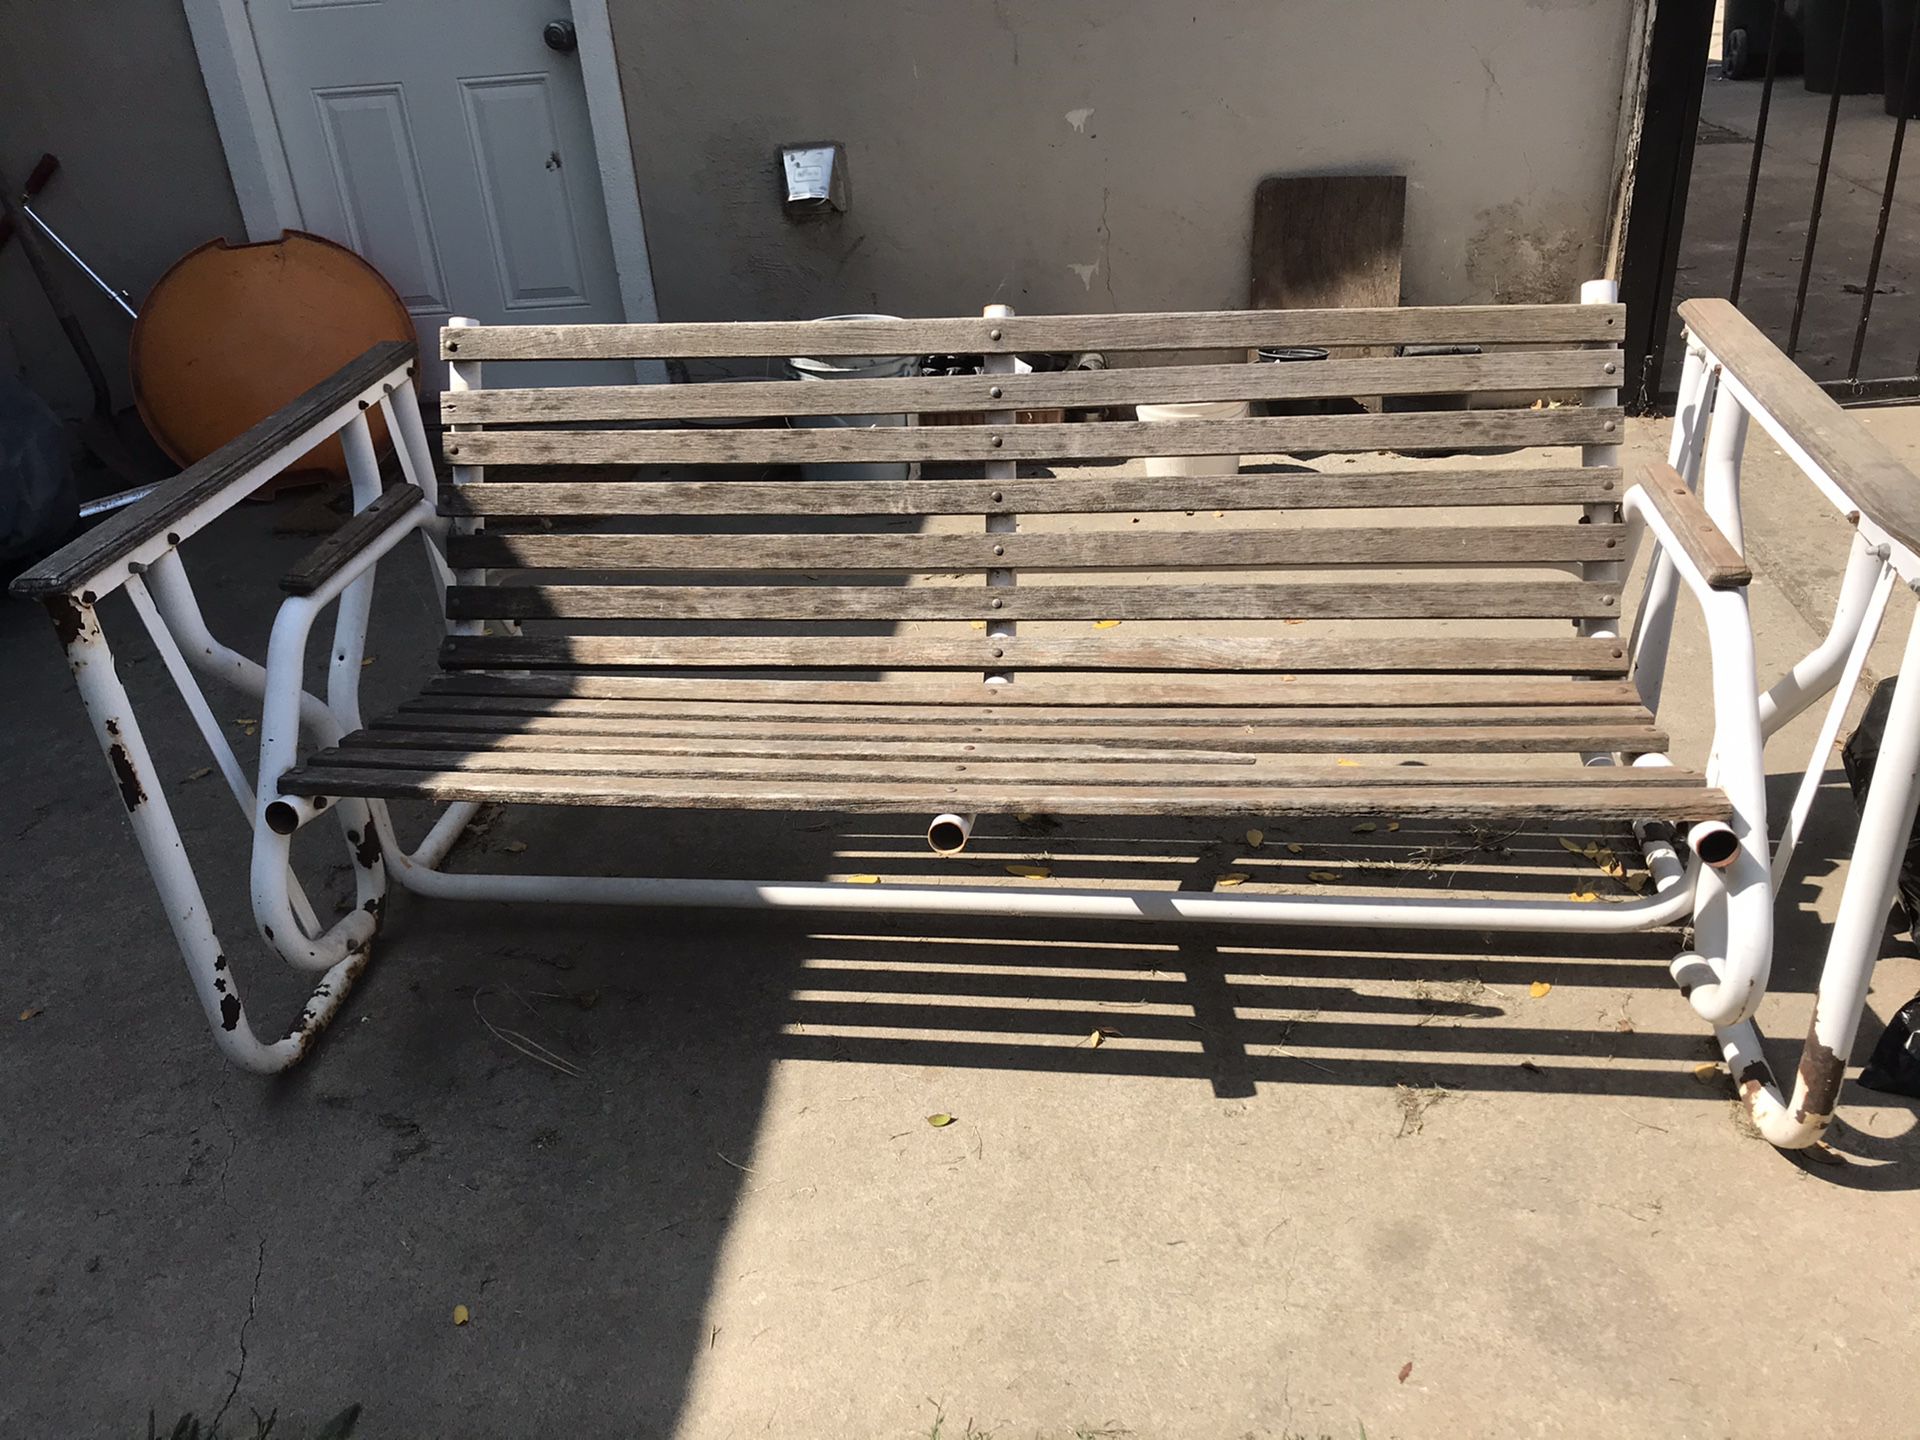 Outdoor swing chair with 1 small piece of wood missing